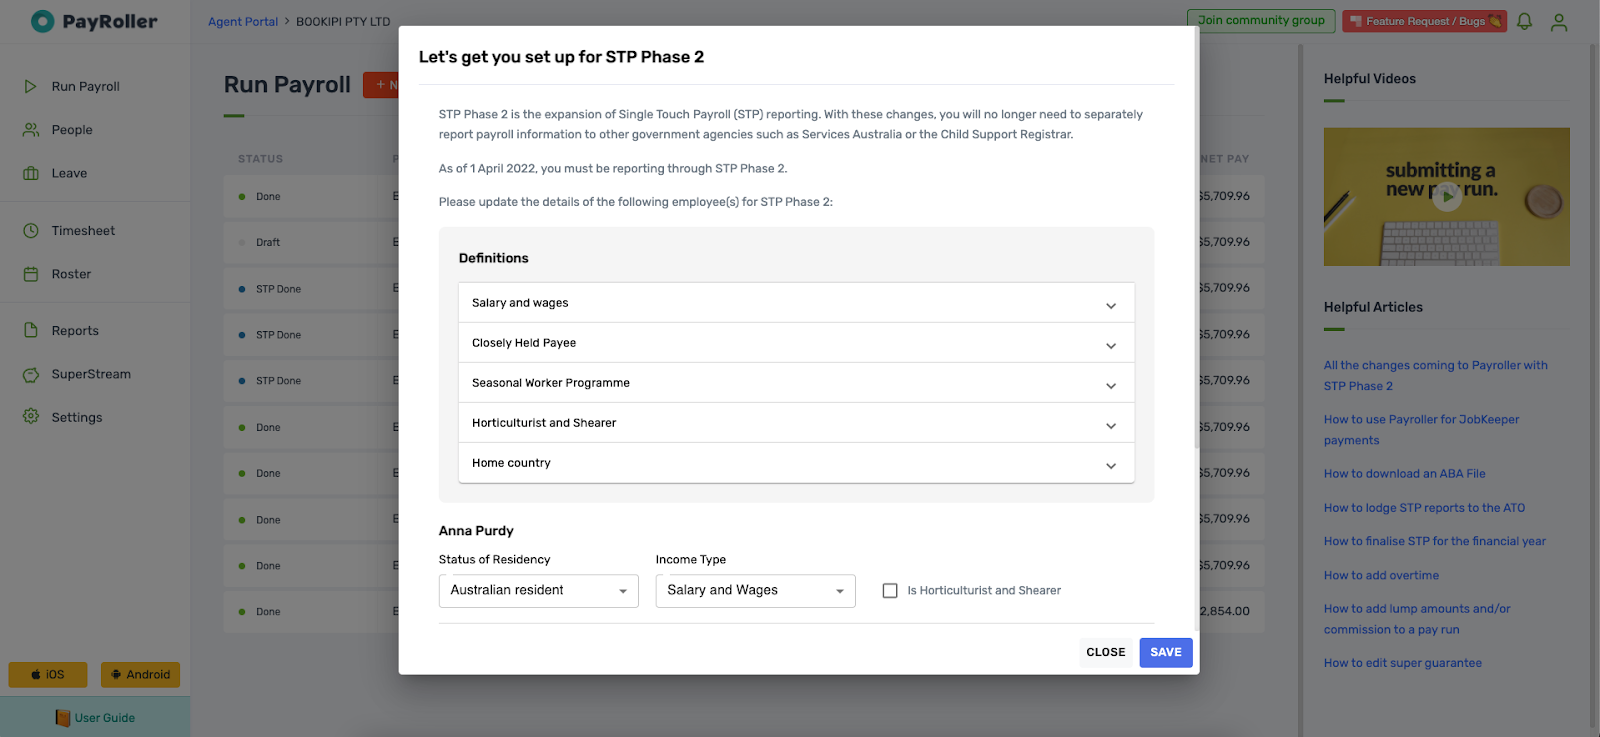 STP phase 2 - How to update your staff for STP Phase 2 - 1